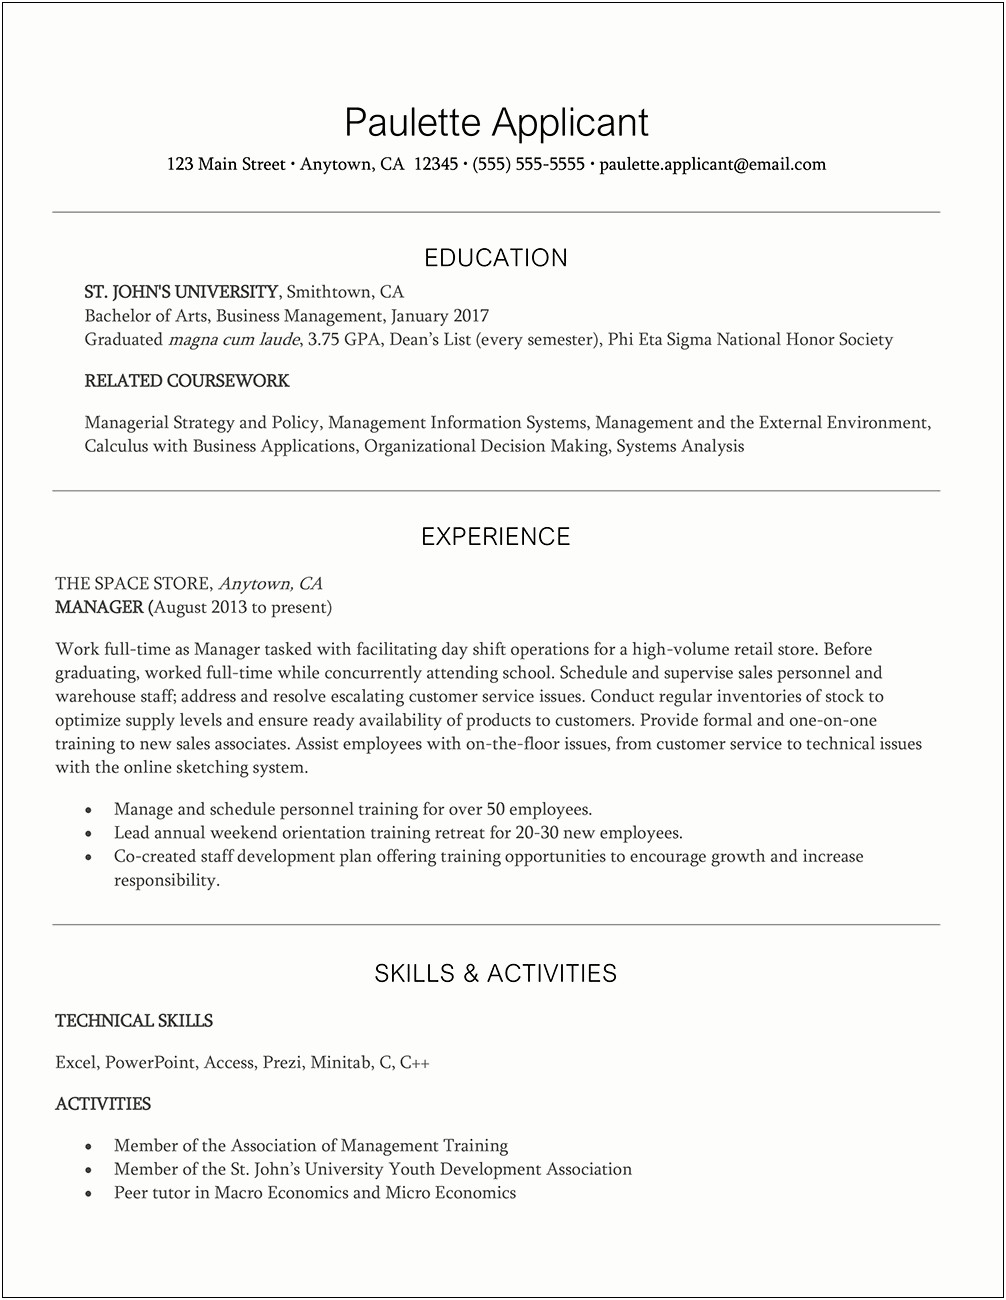 Examples Of Managerial Experience In A Resume